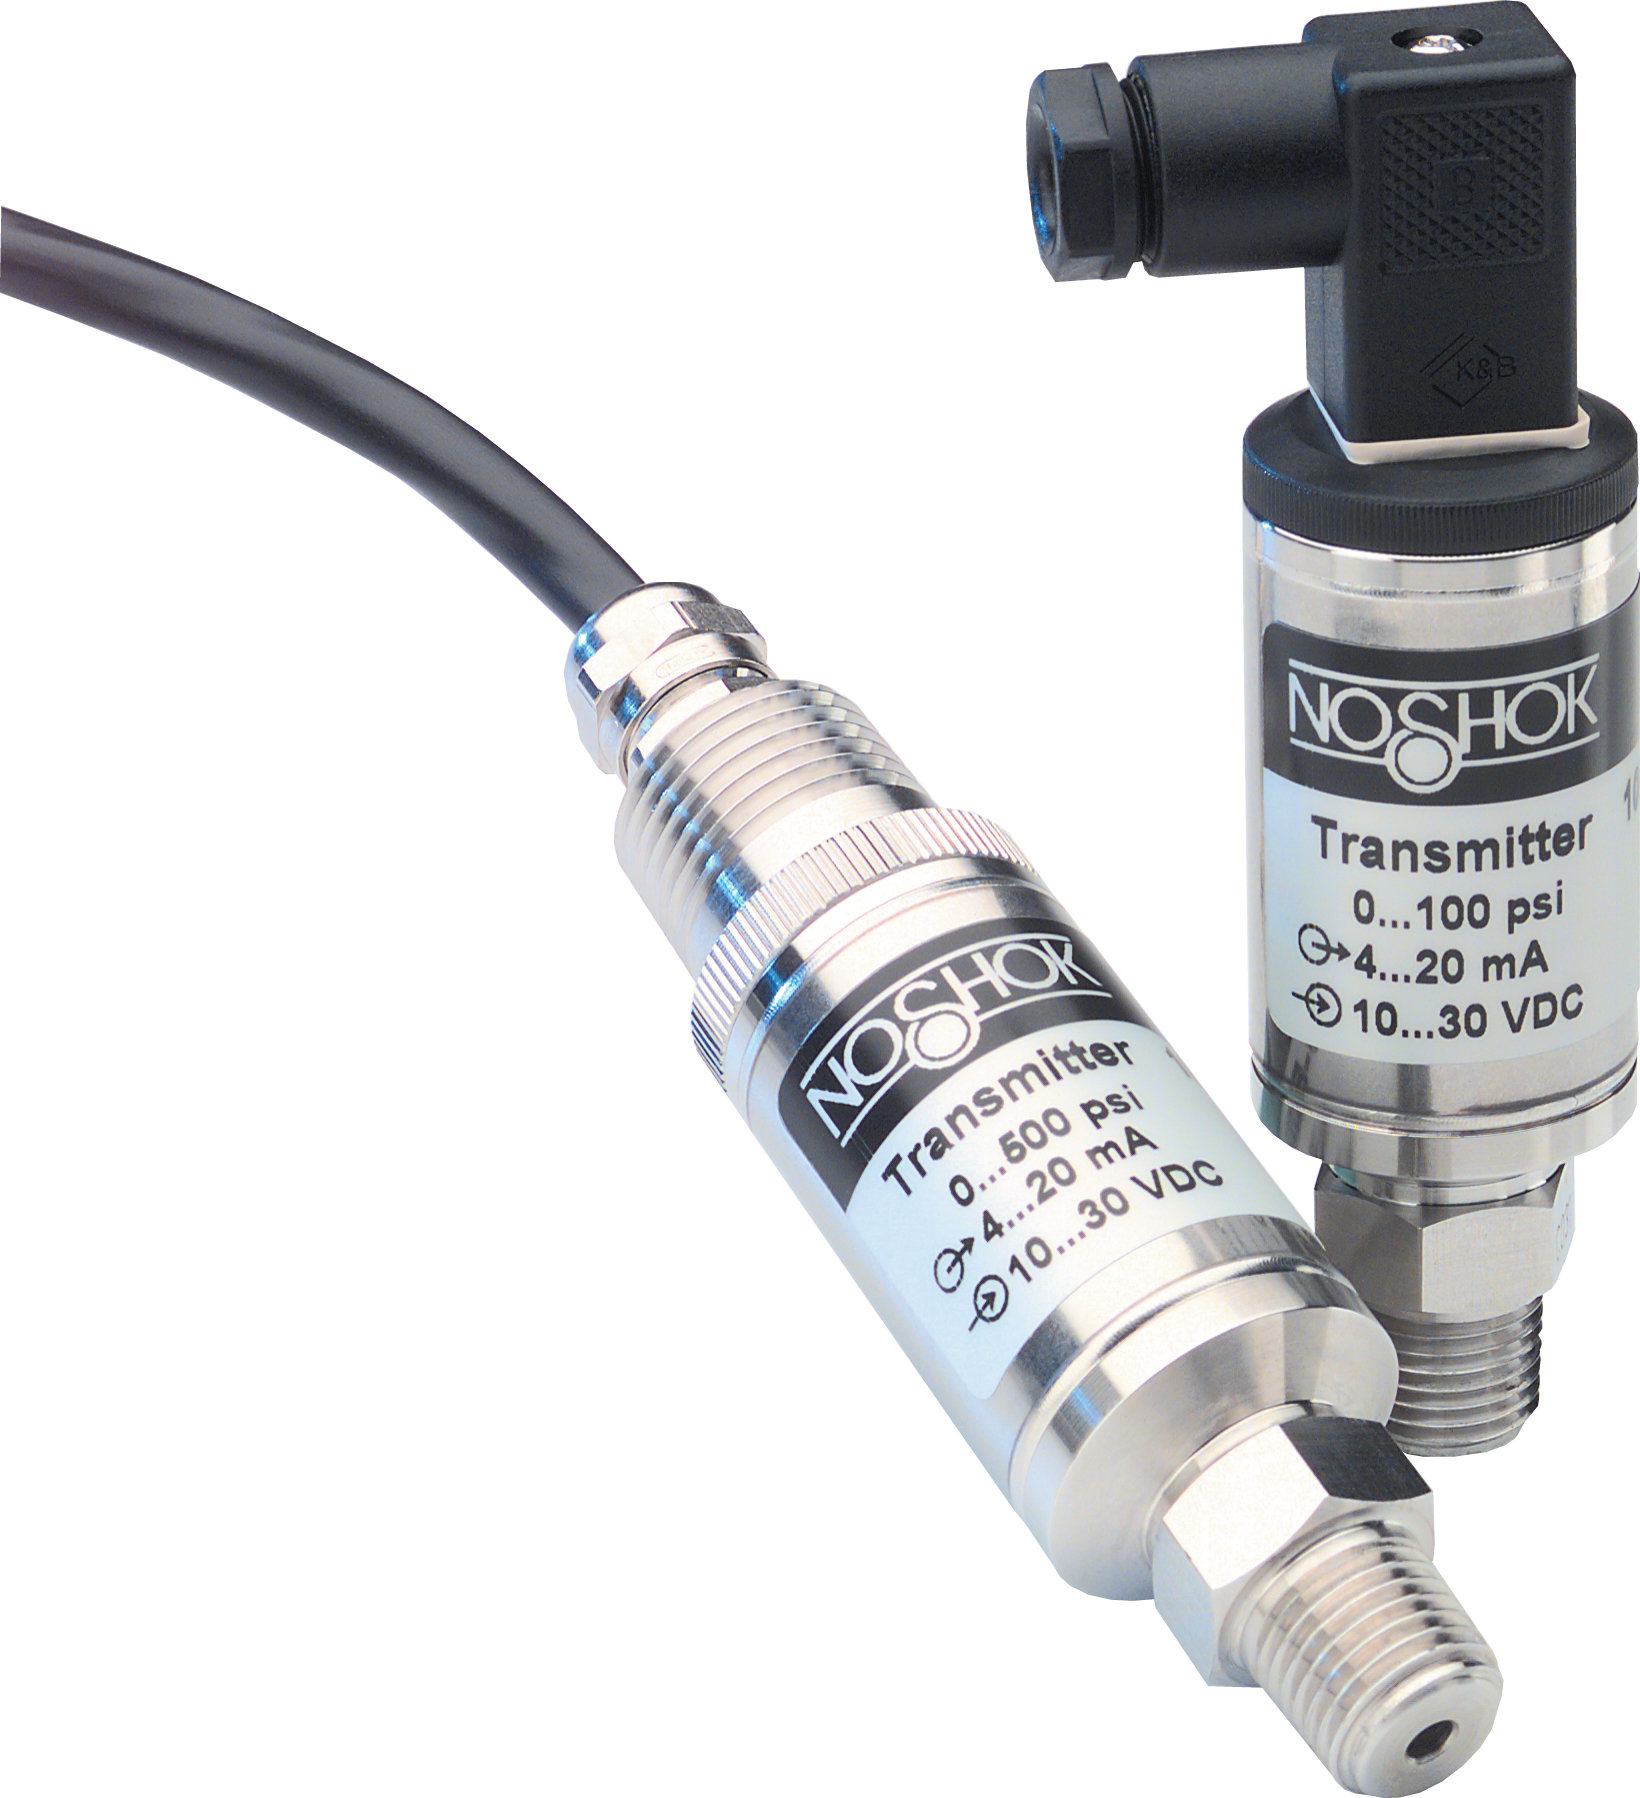 100 Series Current Output Pressure Transmitters